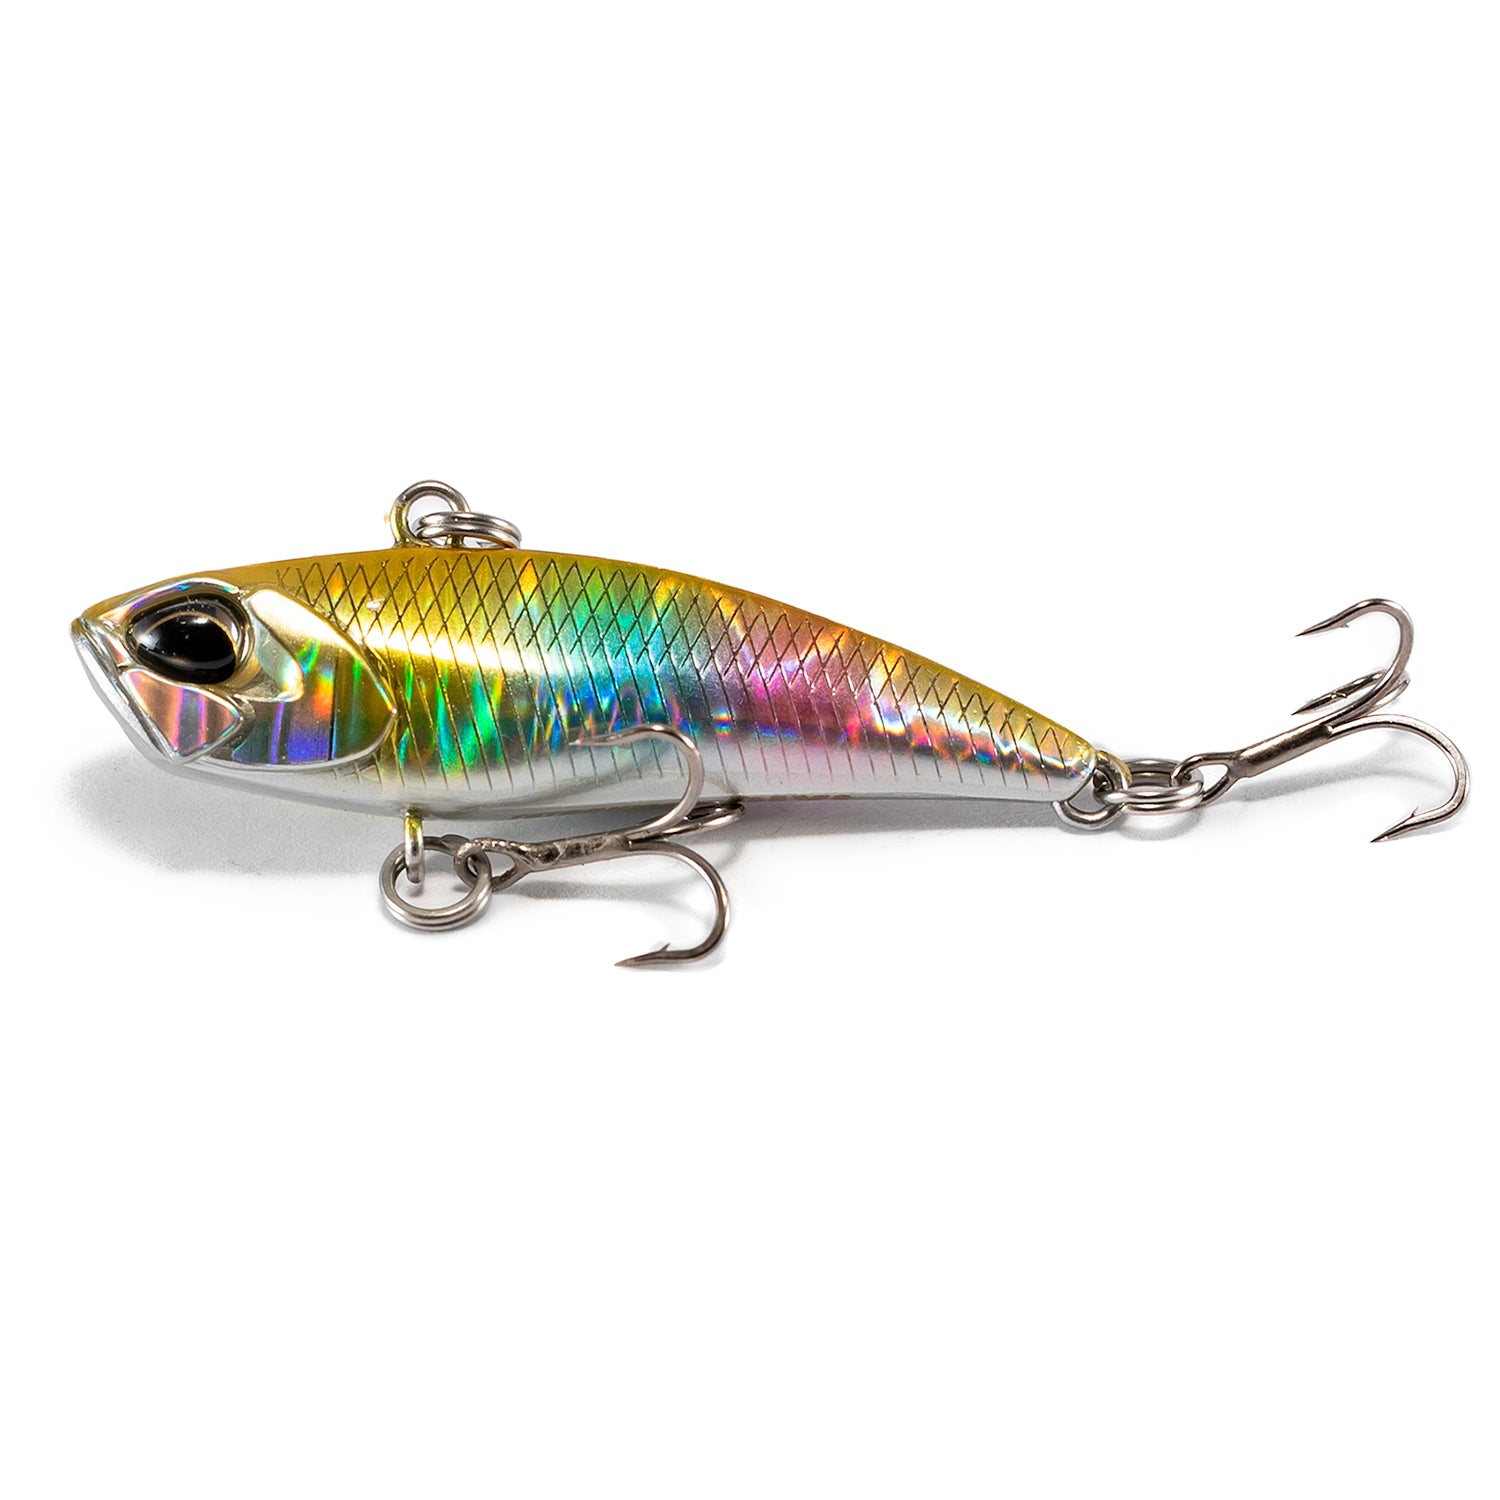 Duo Tetra Works Bivi Vibe - Compleat Angler Nedlands Pro Tackle